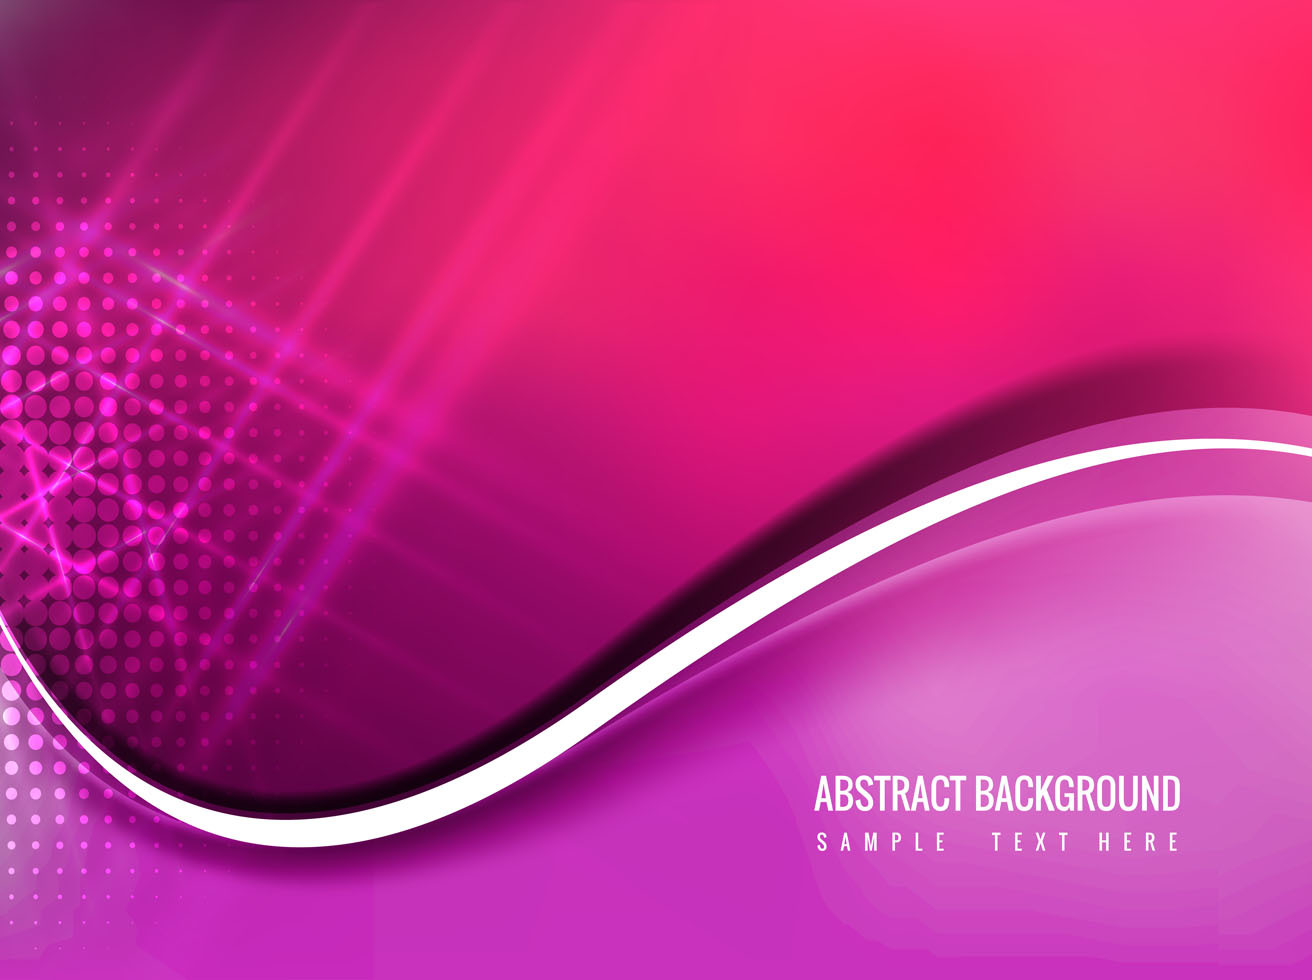 Free Vector Pink Color Abstract Background Vector Art & Graphics